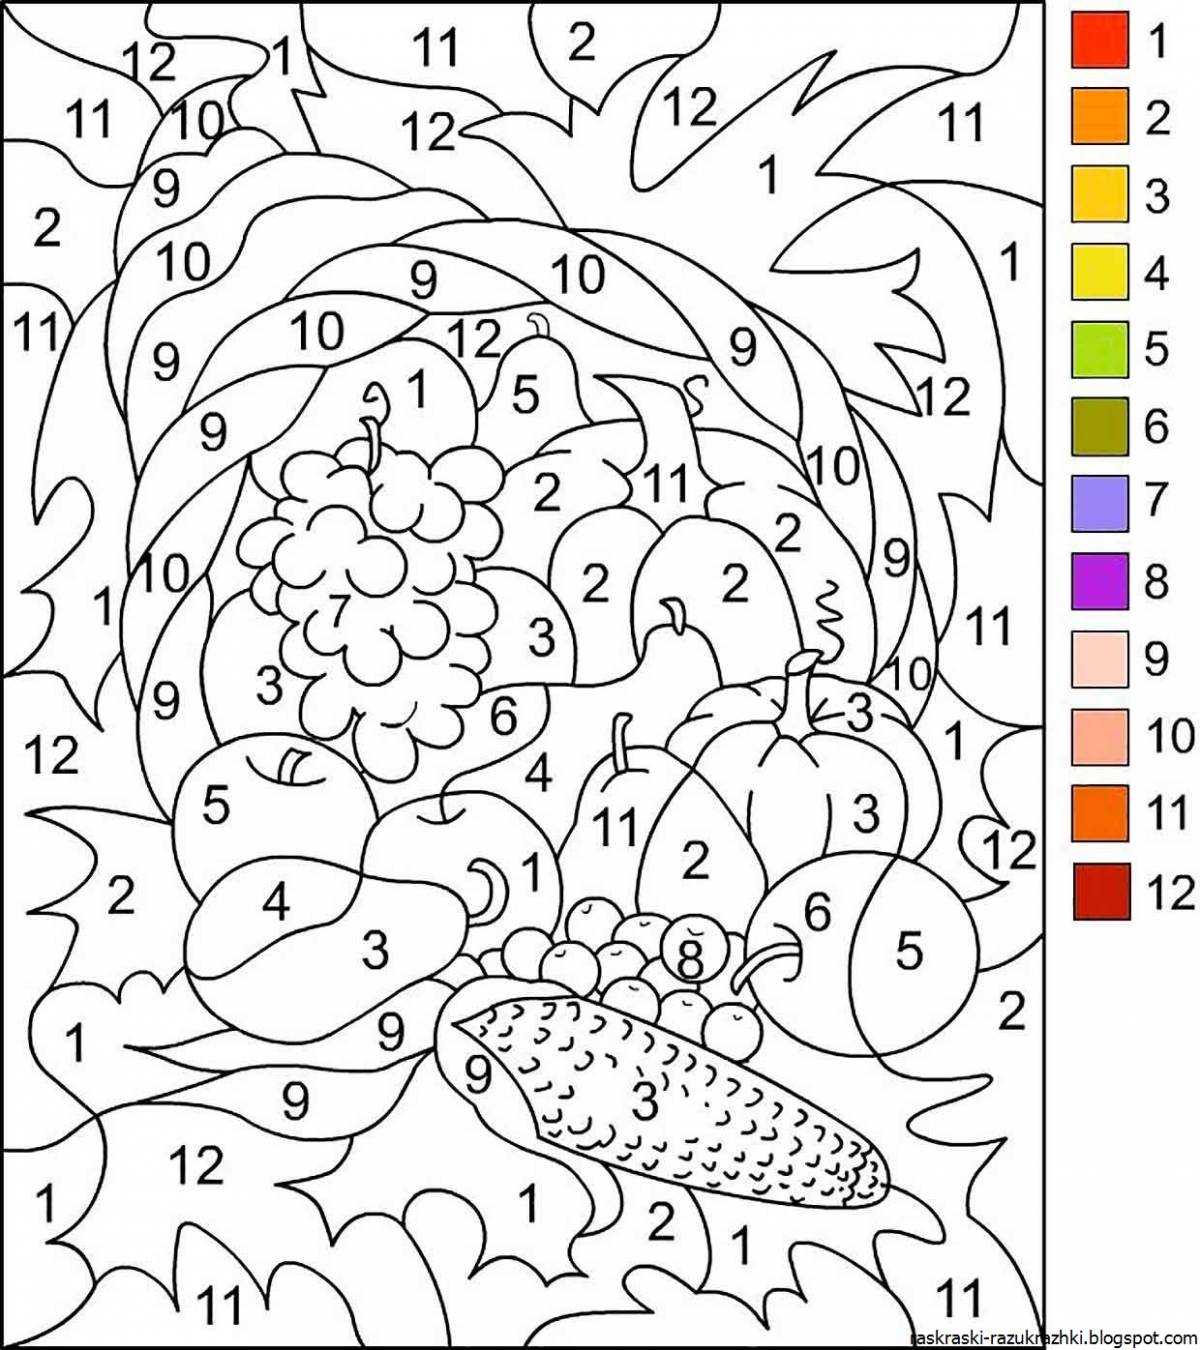 Intriguing coloring by numbers for children 7-8 years old